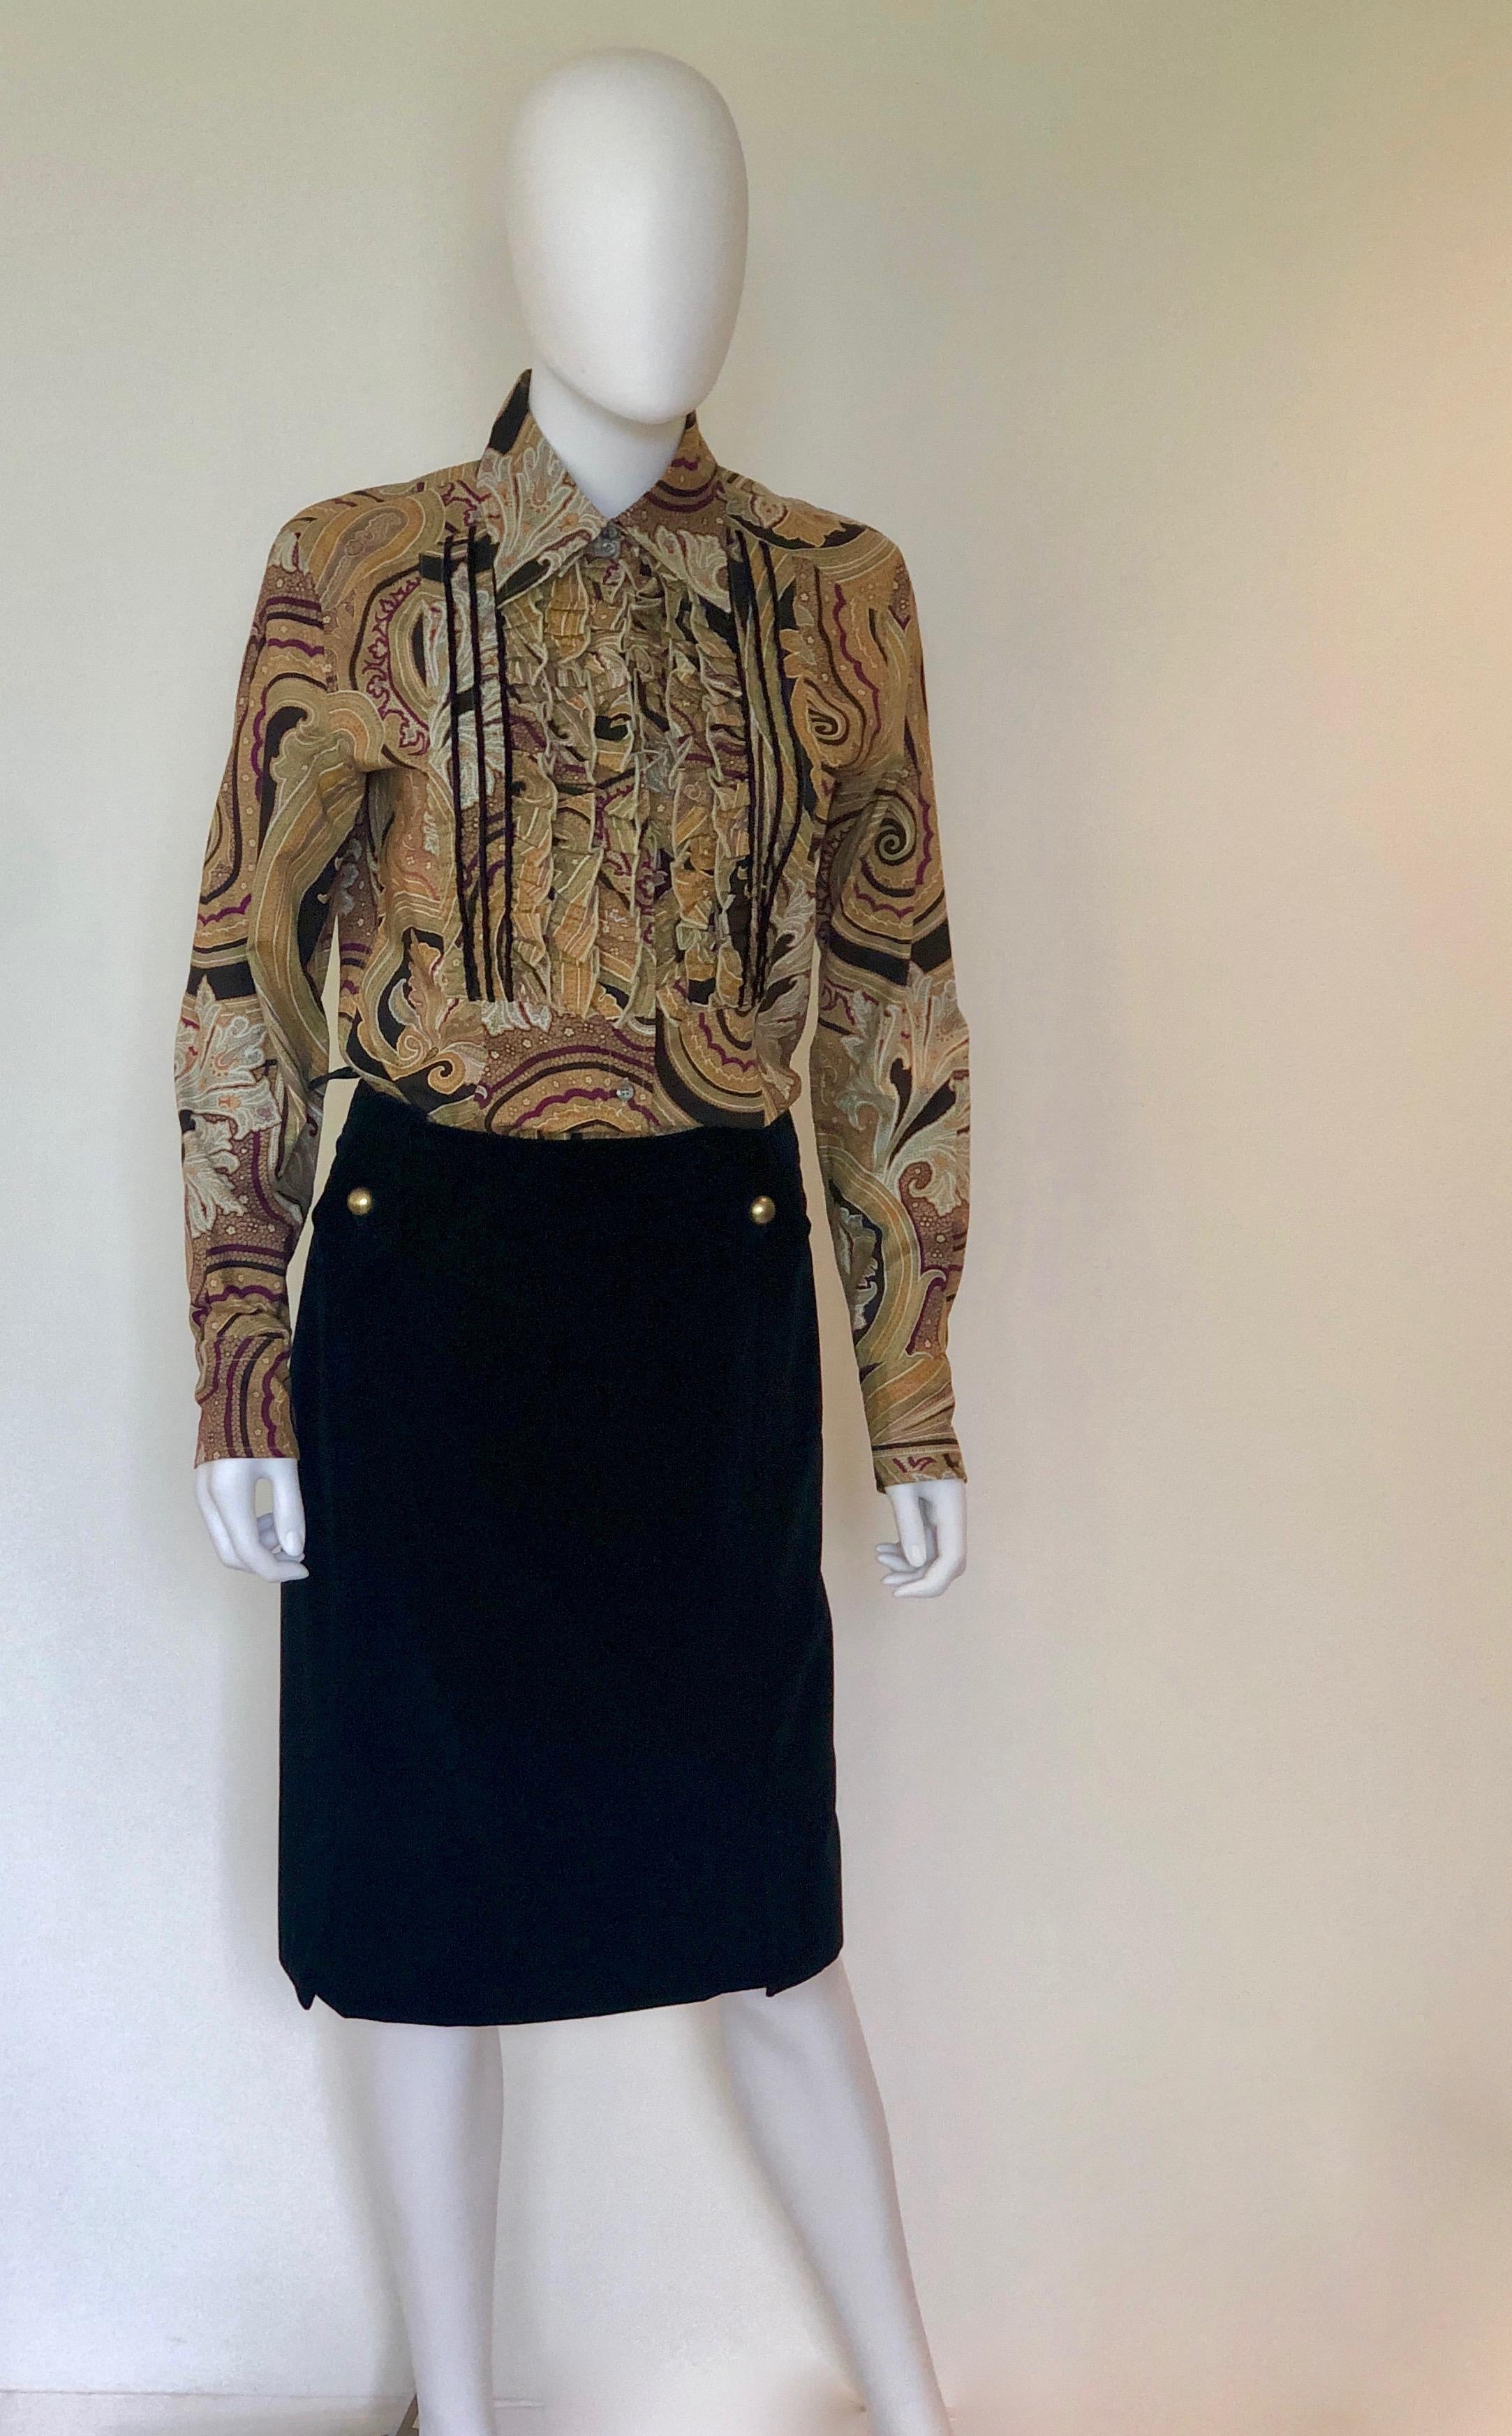 Make:  Yves Saint Laurent
Place of Manufacture:  Italy
Size: French 40
Materials:  Cotton and metal
Color:  Black
Style:  YSL black cotton pencil skirt that hits at the knee.  The skirt has a hidden zipper in the back.  The front of the skirt has to